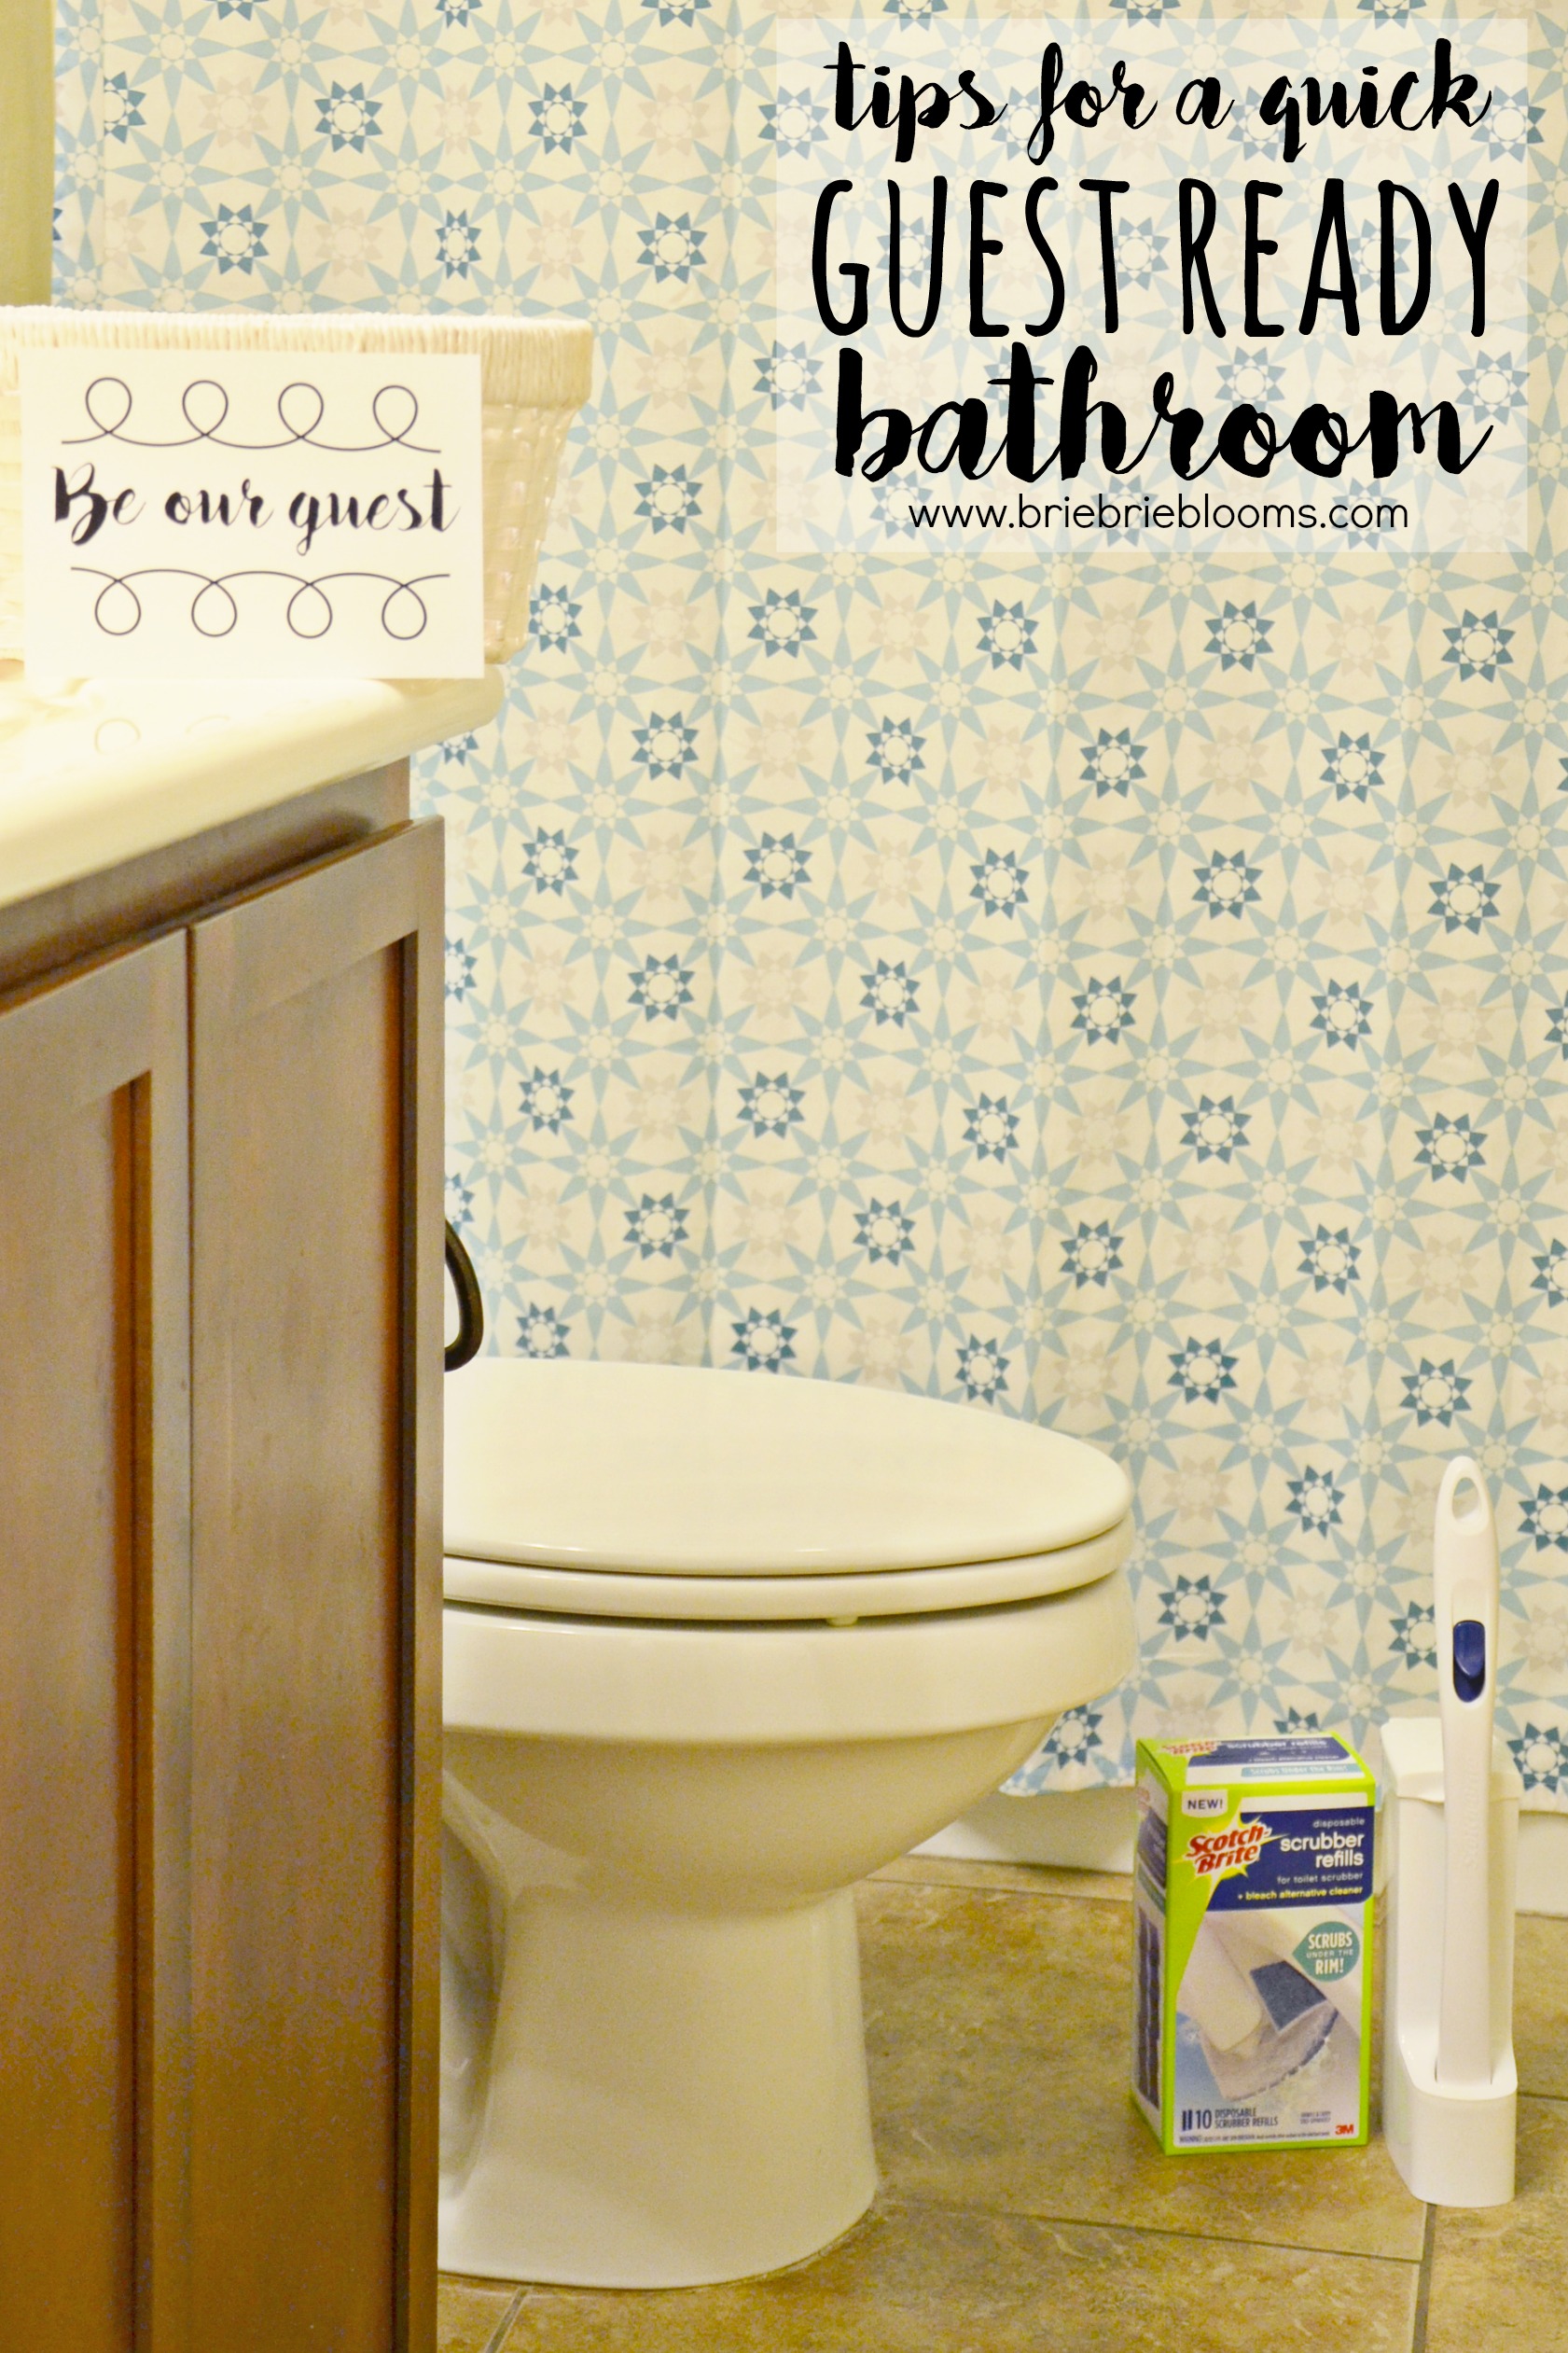 tips for a quick guest ready bathroom